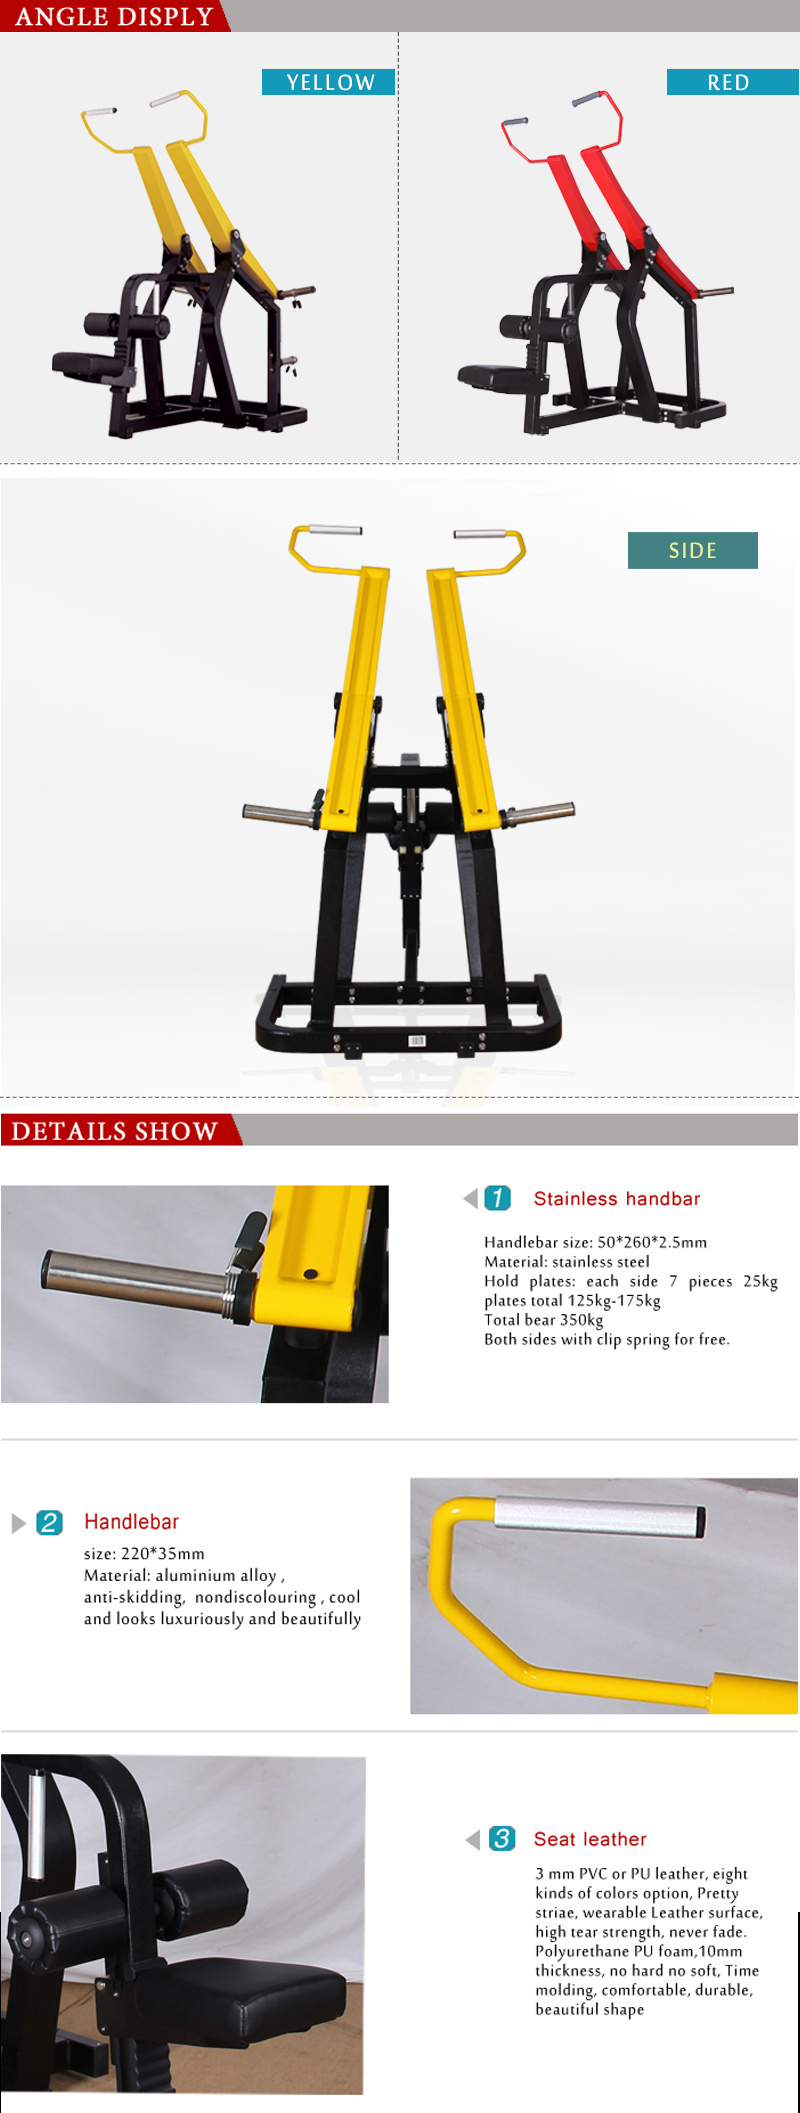 Bft-1002 Hot-Sale Free Weight Gym Machine/Hammer Strength/Plate Loaded Machine